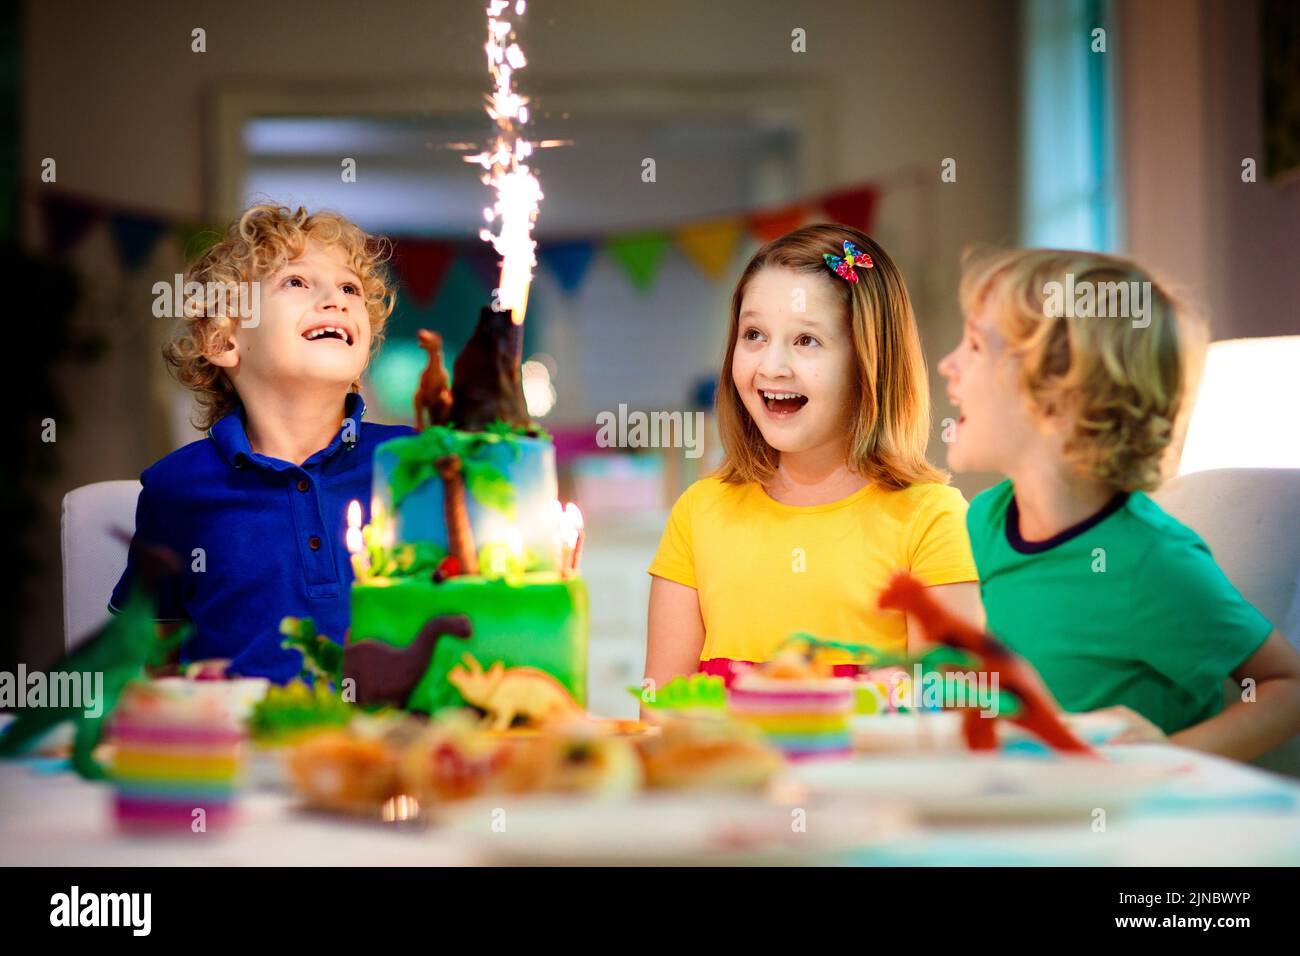 Kids birthday party. Dinosaur theme cake. Little girl blowing candles and opening gifts. Children event. Decoration for dinosaurs themed celebration. Stock Photo